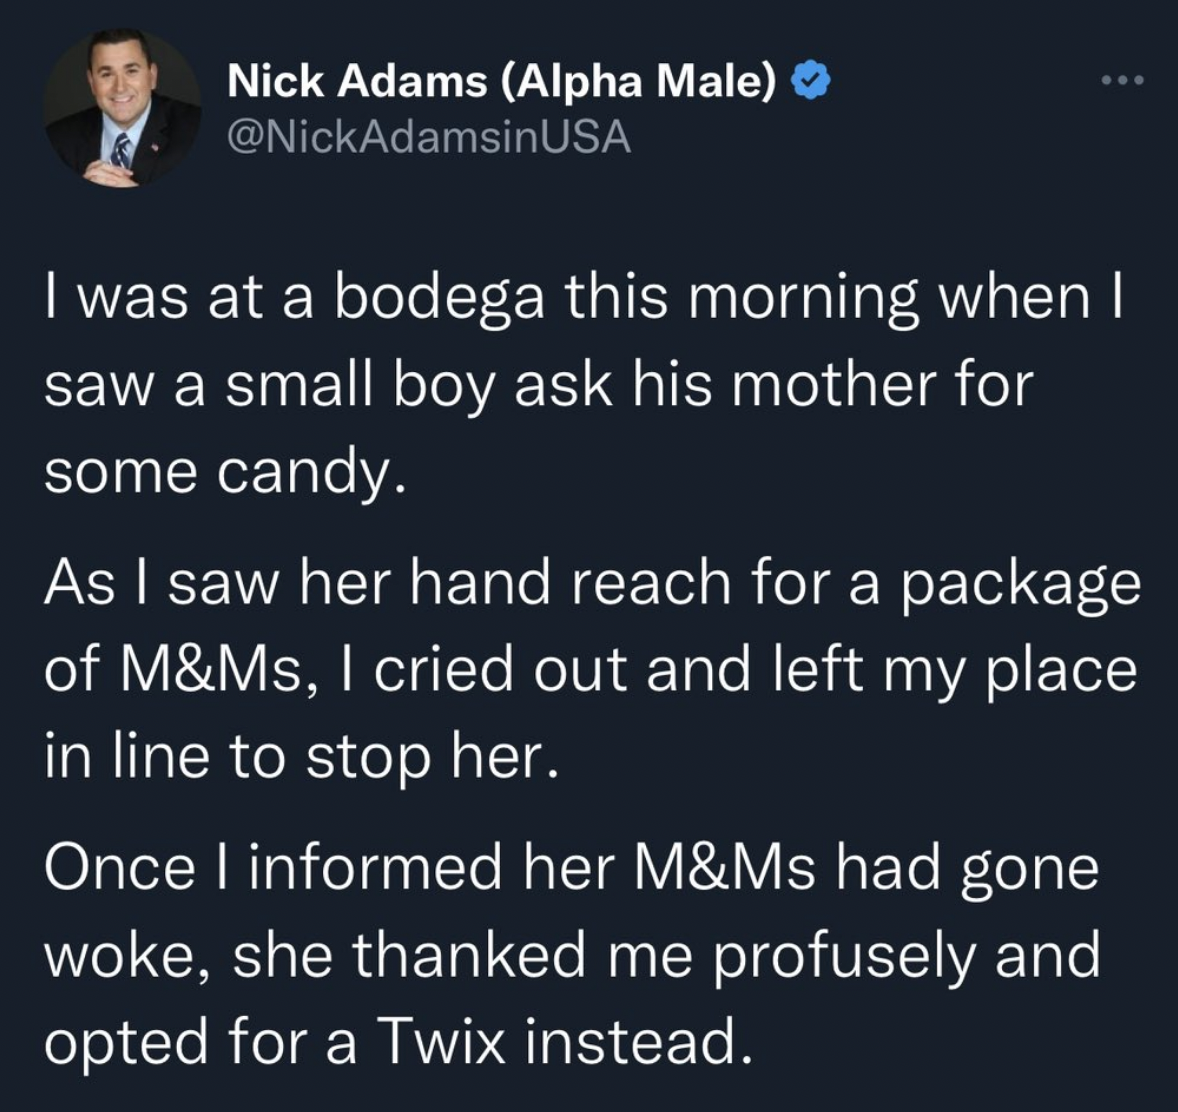 &quot;As I saw her reach for a package of M&amp;amp;Ms, I cried out and left my place in line to stop her.&quot;